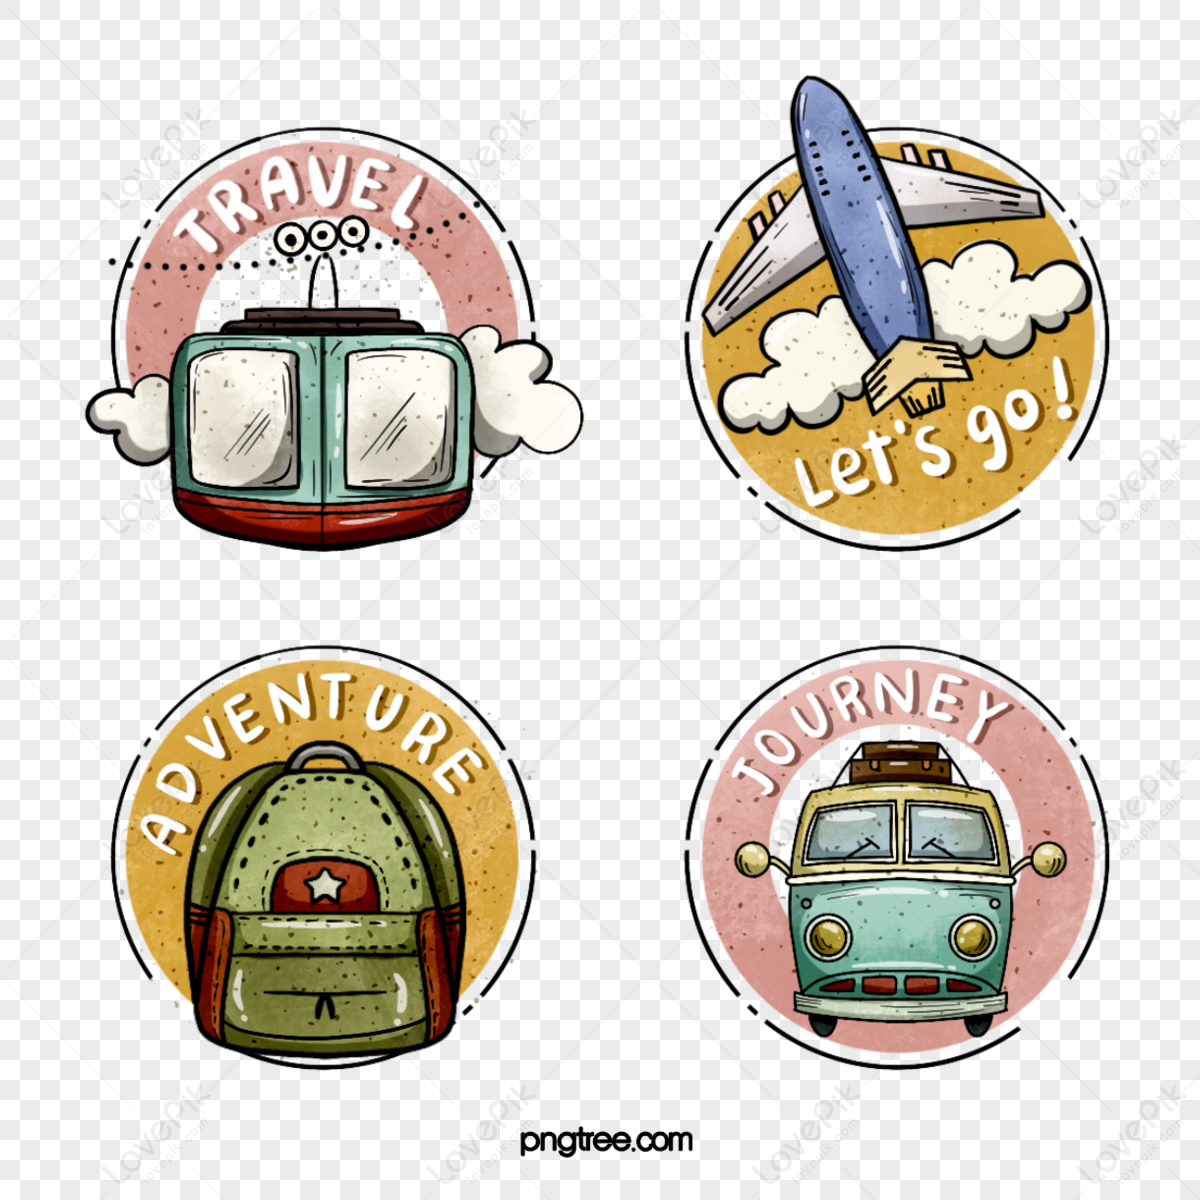 Cartoon style travel theme stickers,paint hand,aircraft,hand painted png hd transparent image